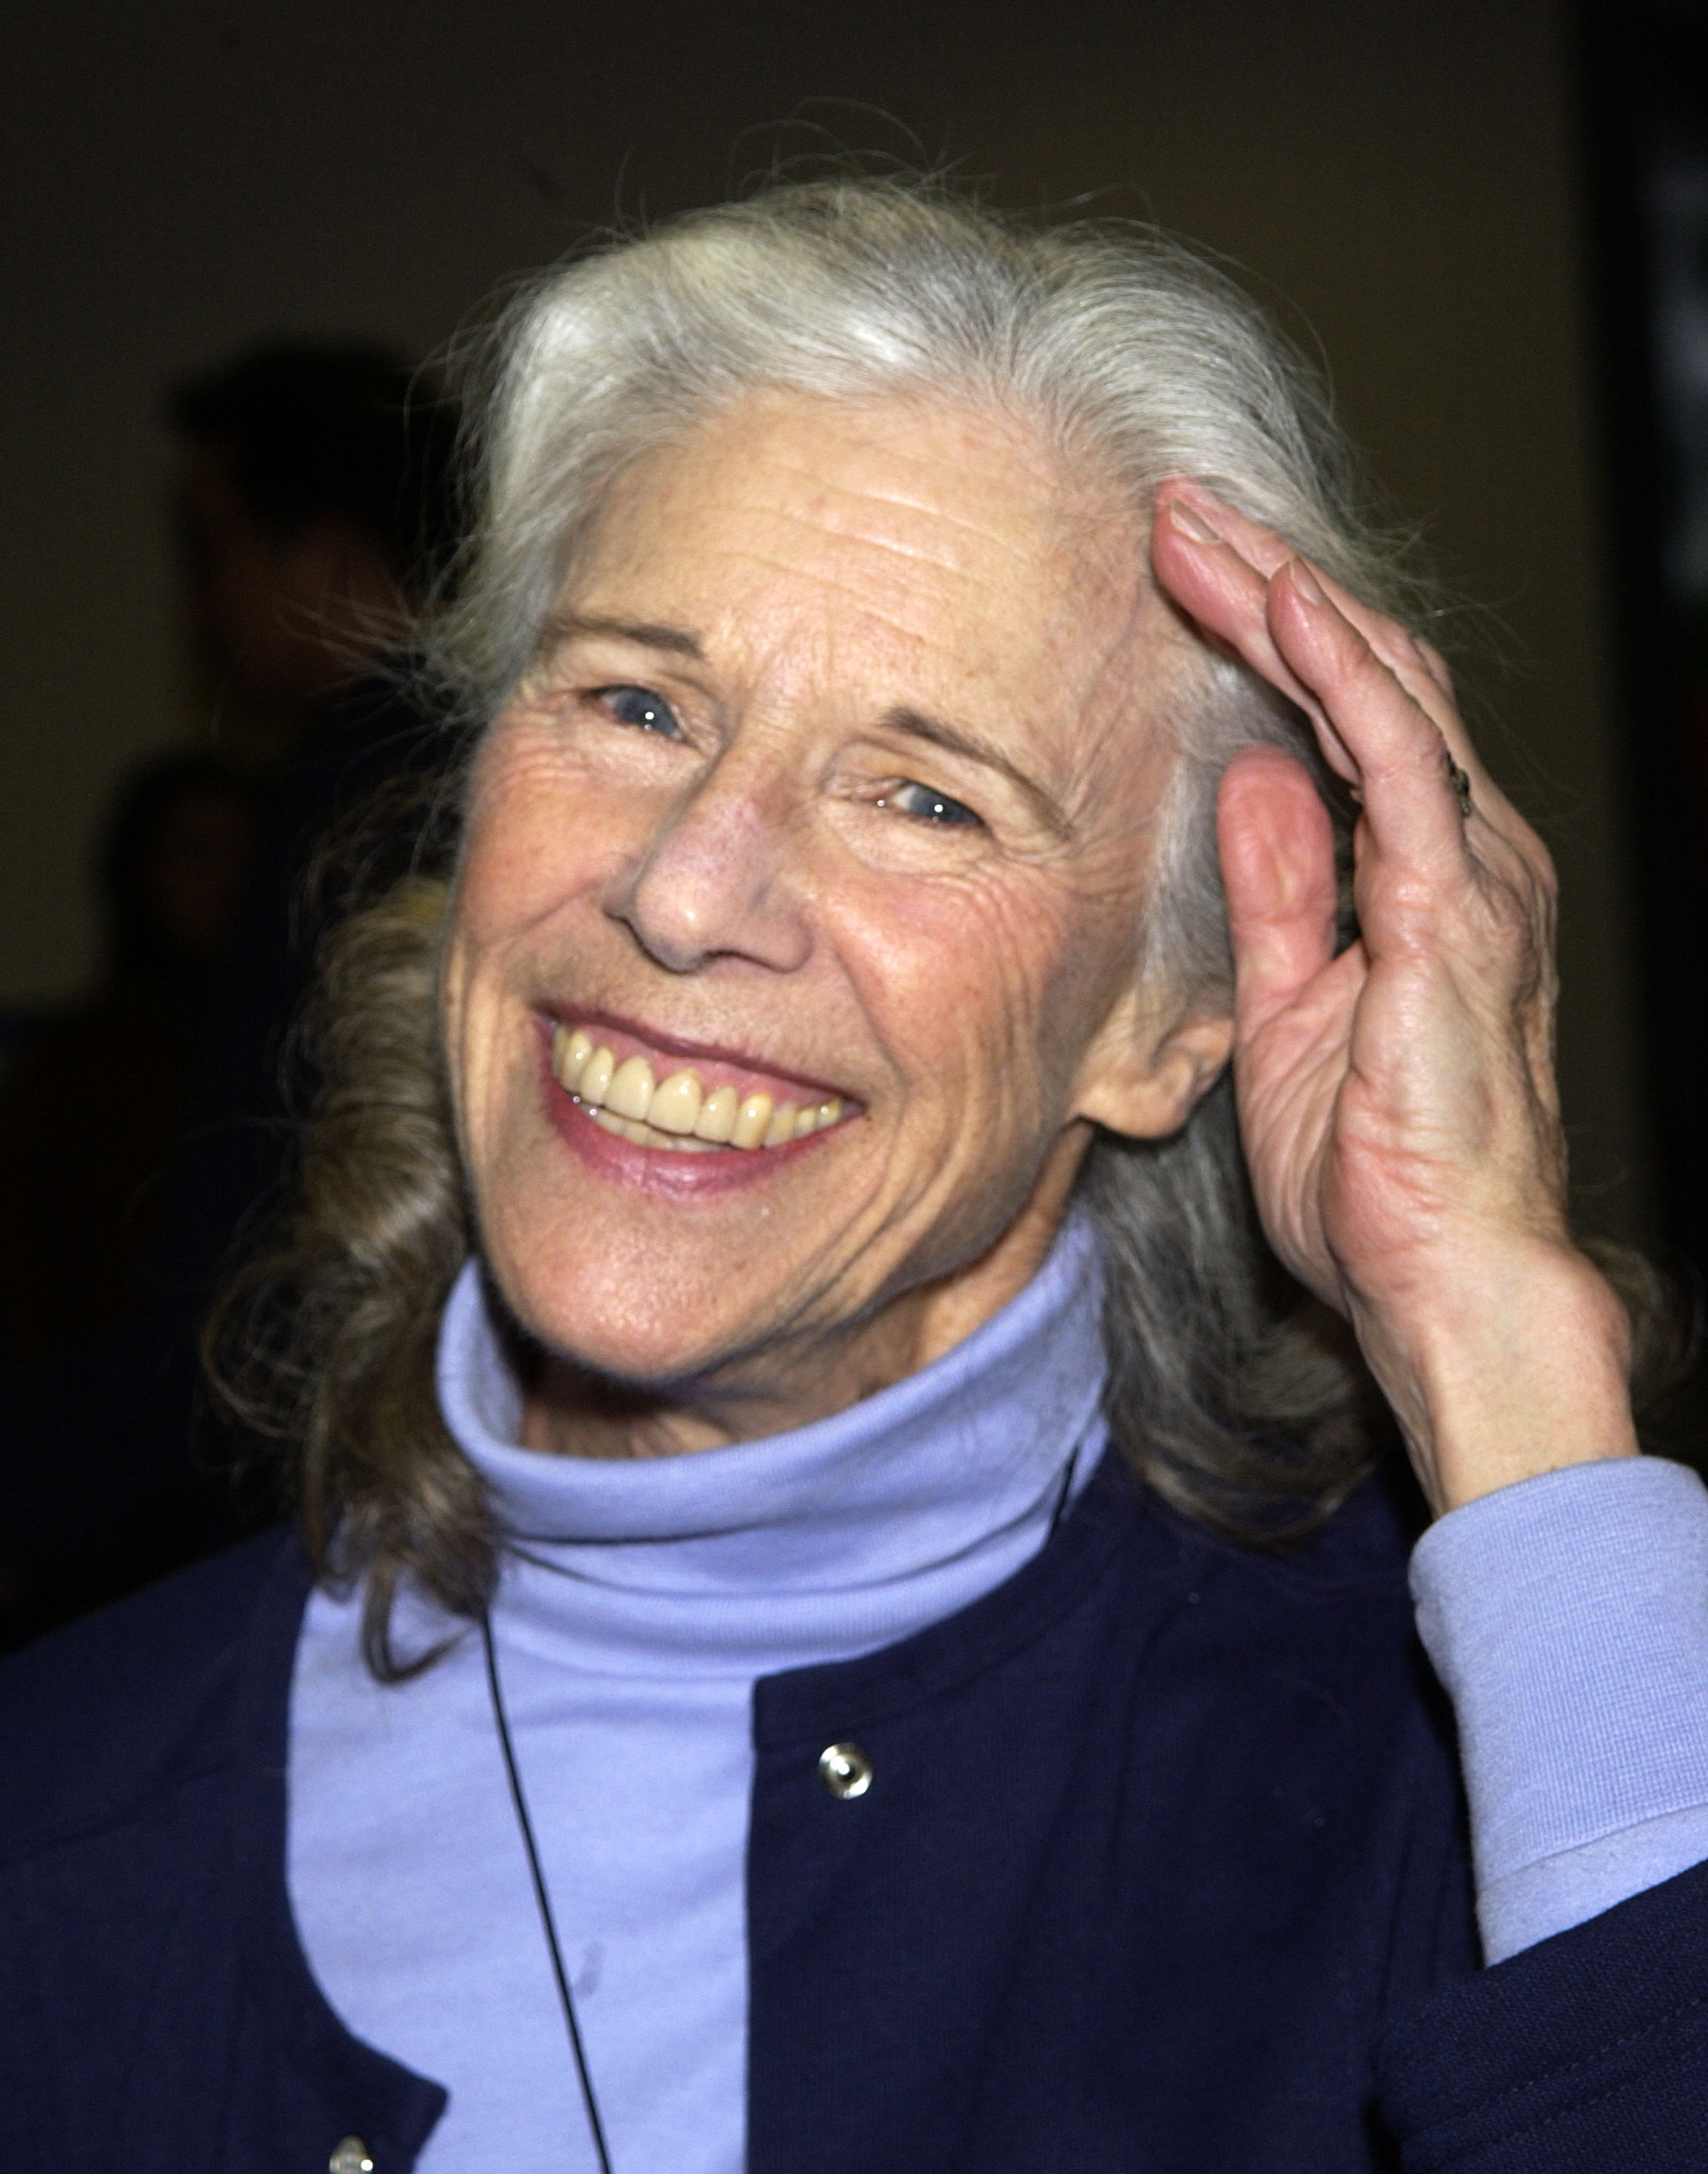 Frances Sternhagen at the premiere of "The Laramie Project" in New York City in 2002 | Source: Getty Images